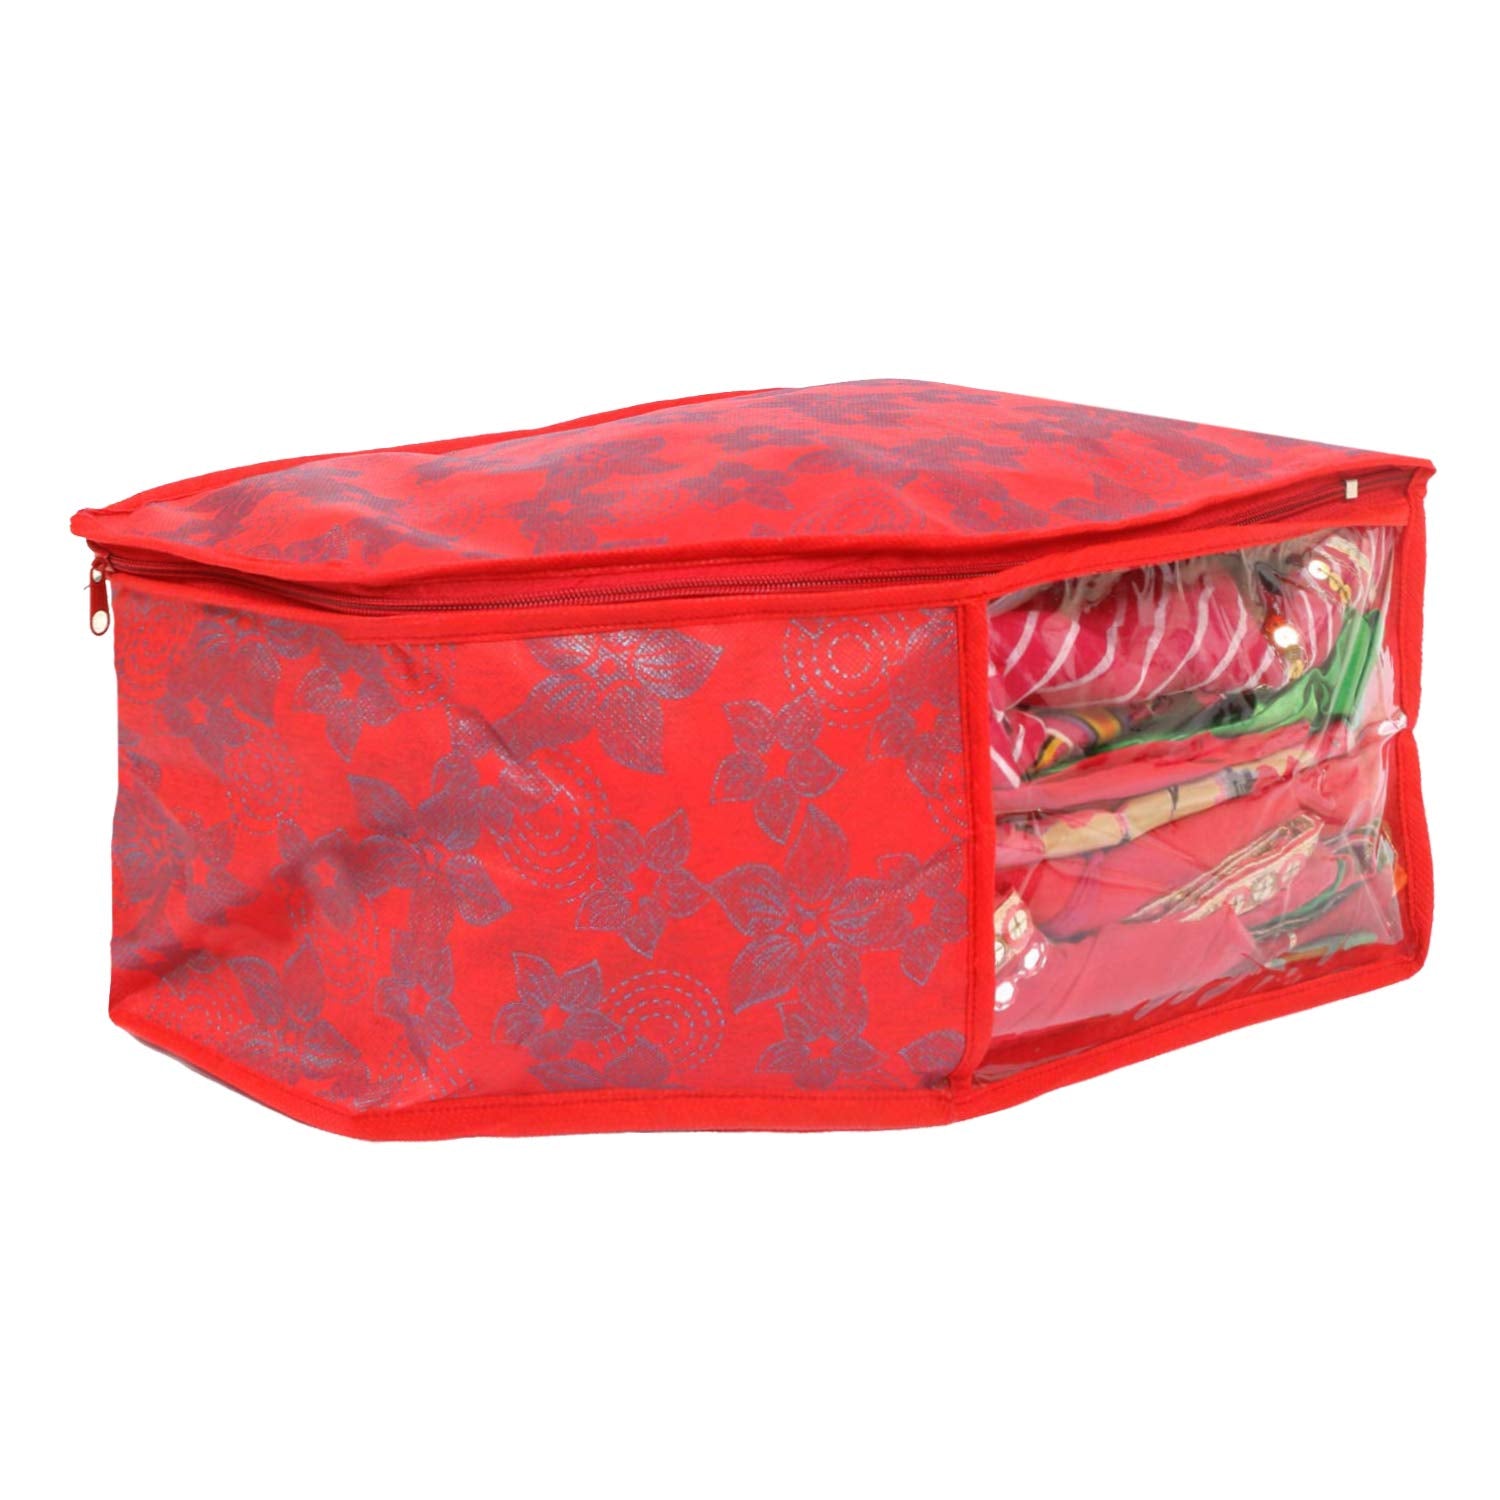 Kuber Industries Metallic Printed Non Woven 3 Piece Saree Cover/Cloth Wardrobe Organizer and 3 Pieces Blouse Cover Combo Set (Red) -CTKTC038409